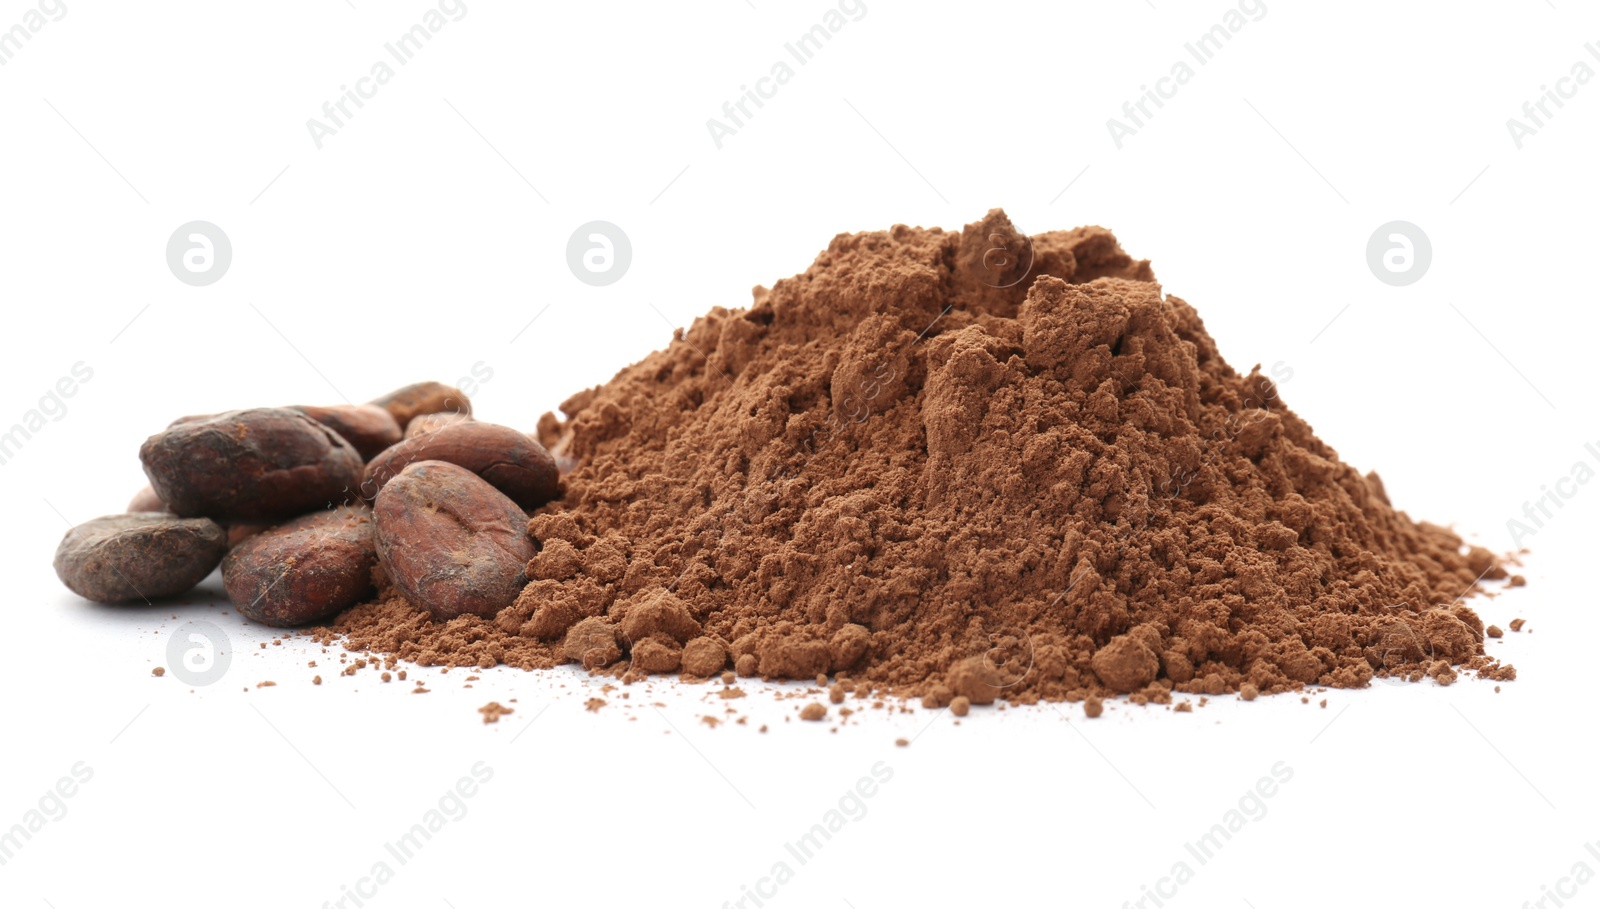 Photo of Cocoa powder and beans on white background